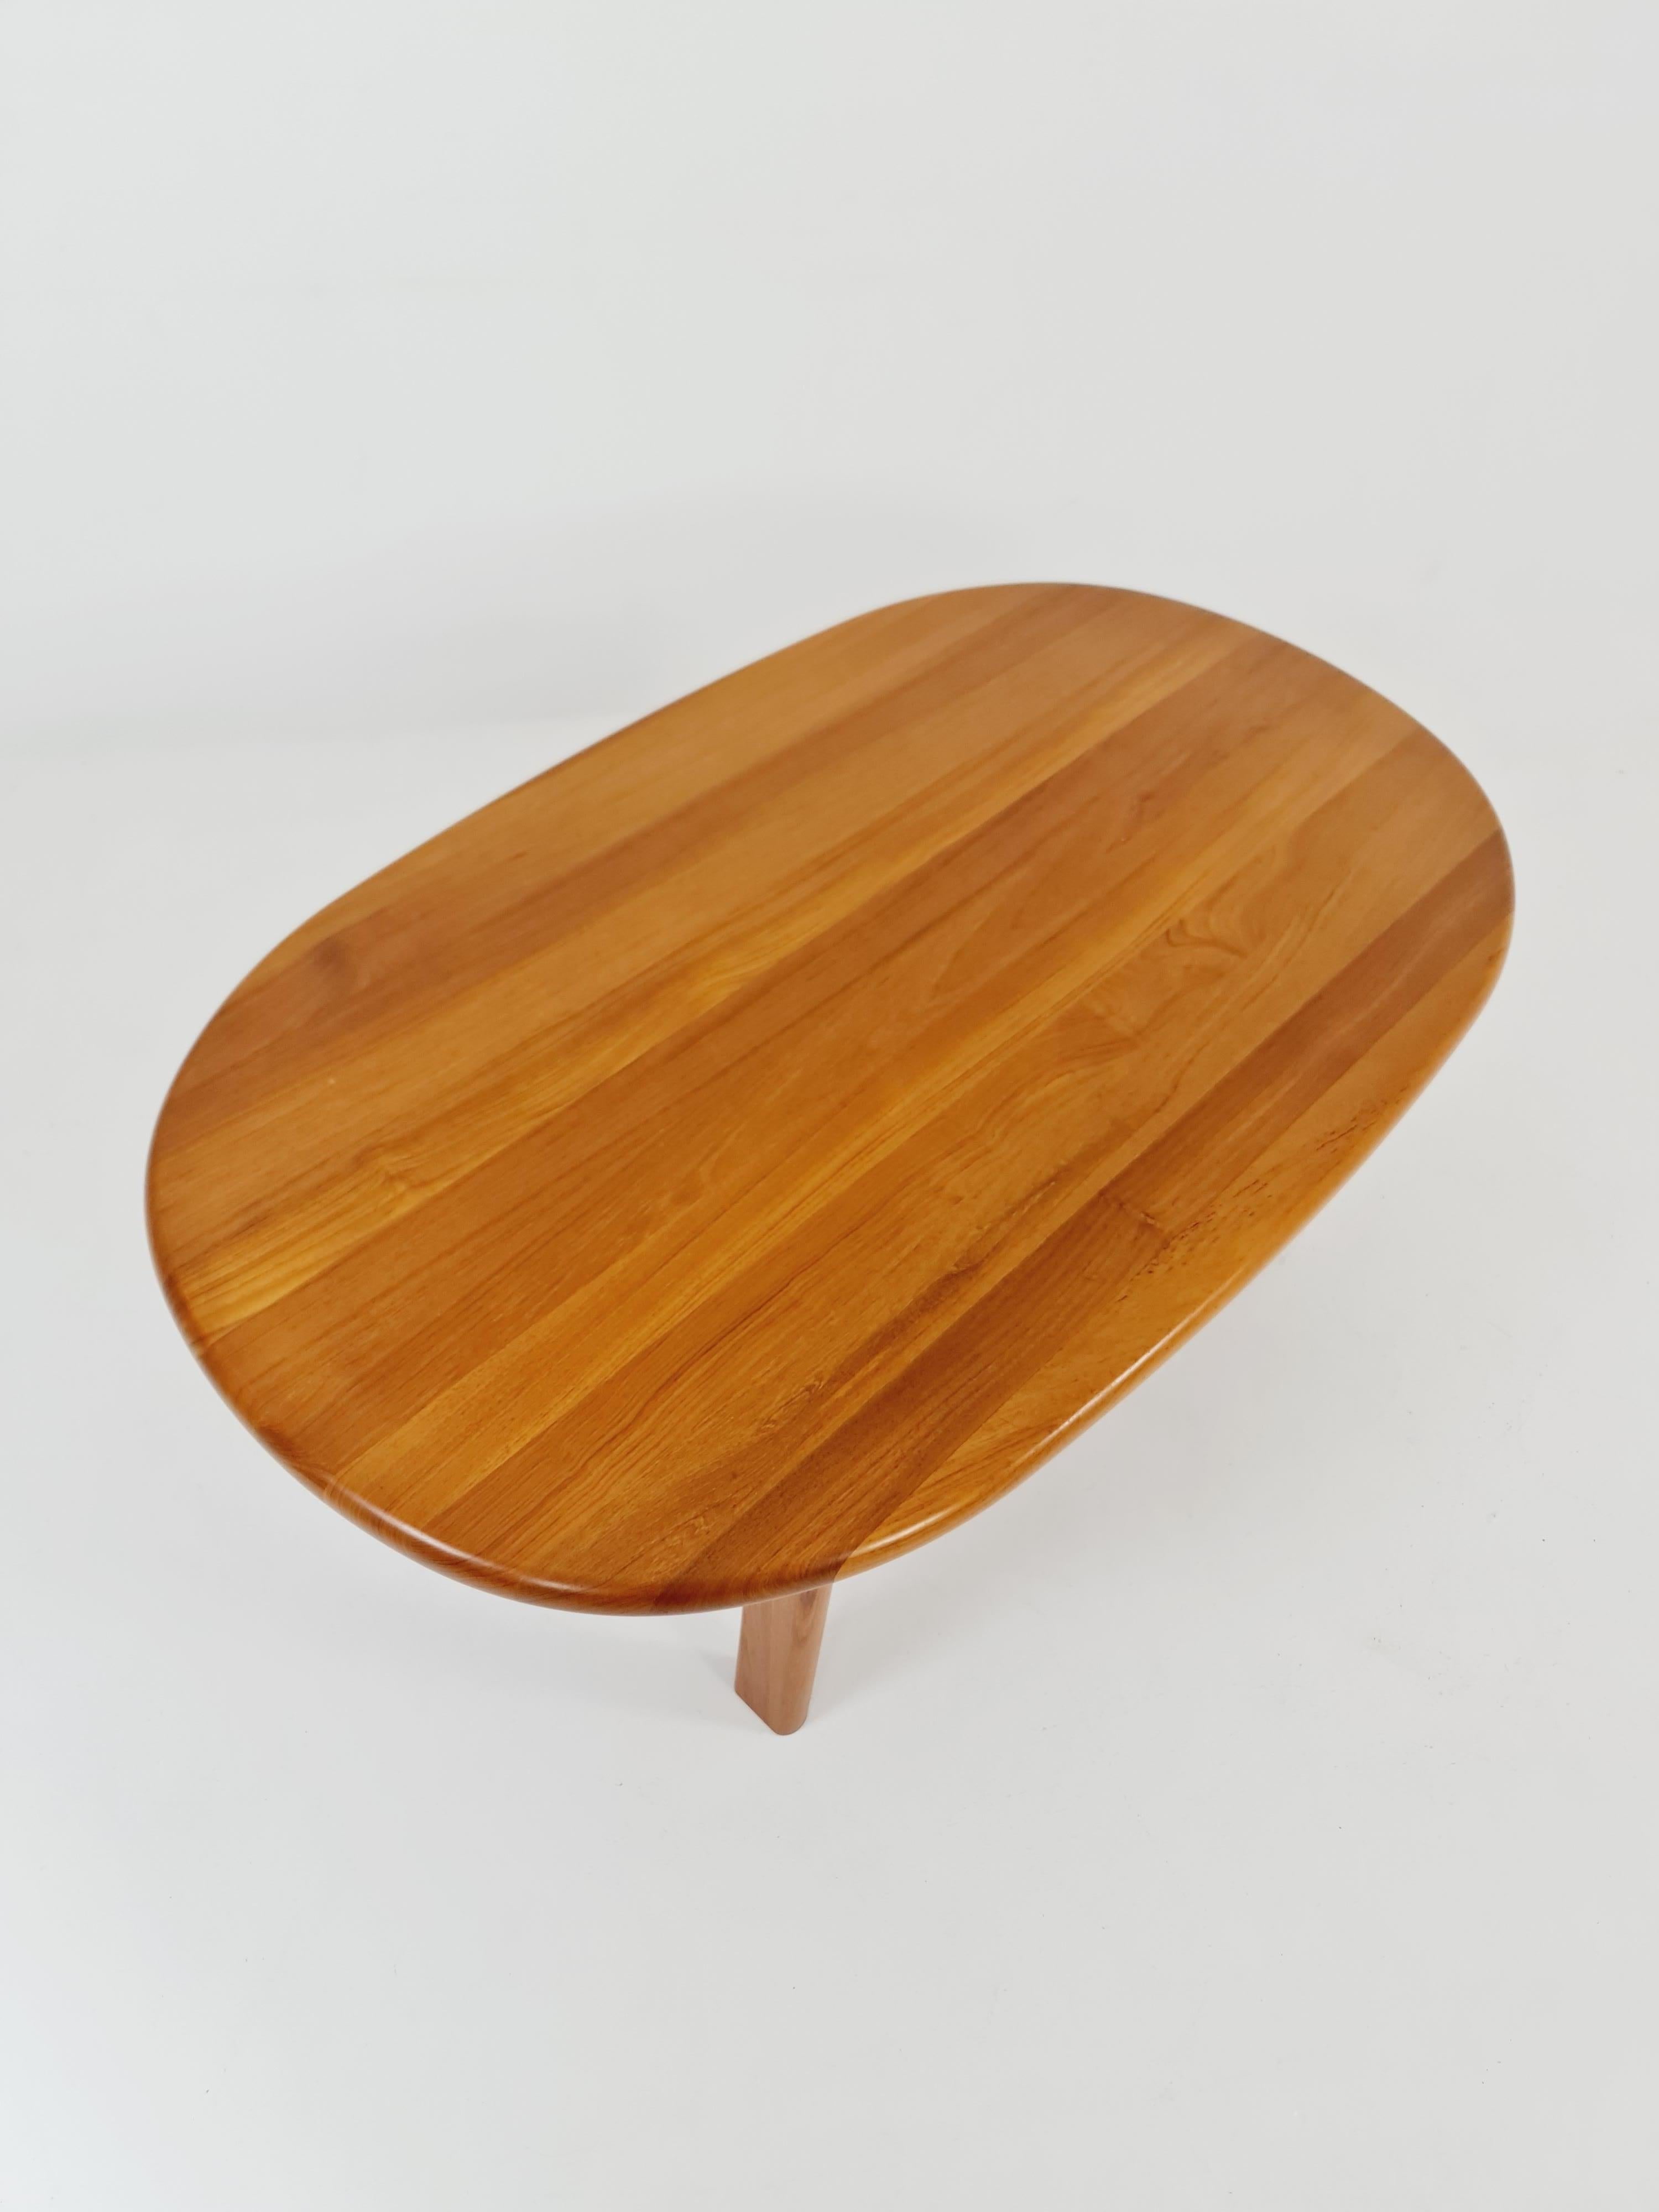 Danish Teak solid coffee table/ side table By Niels Bach for Randers Möbel, 1960 For Sale 4